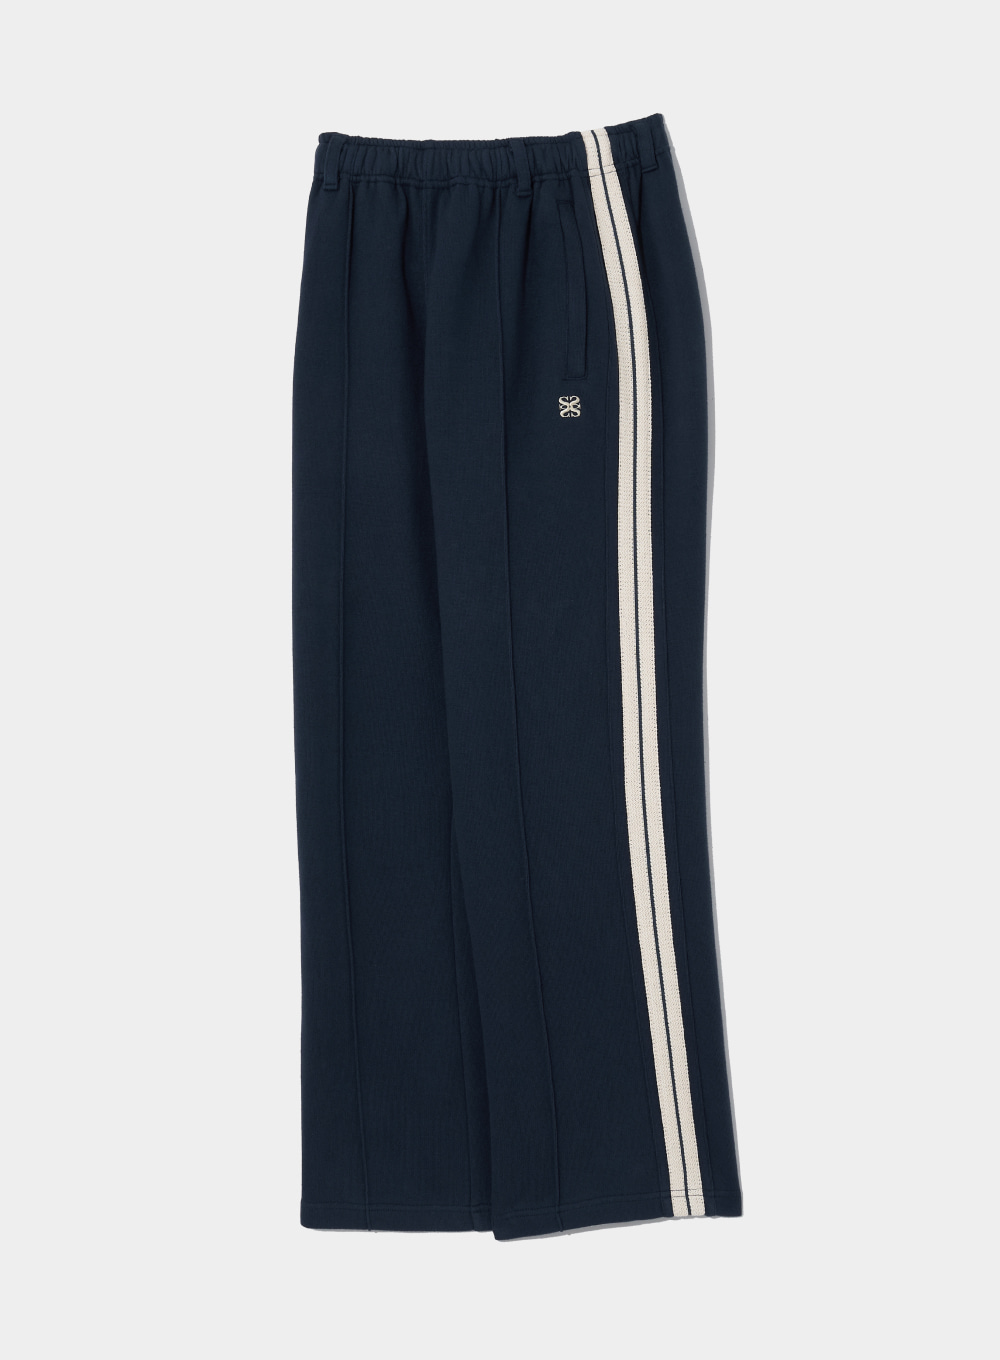 (W) Lawton All Day Track Pants - Classic Navy